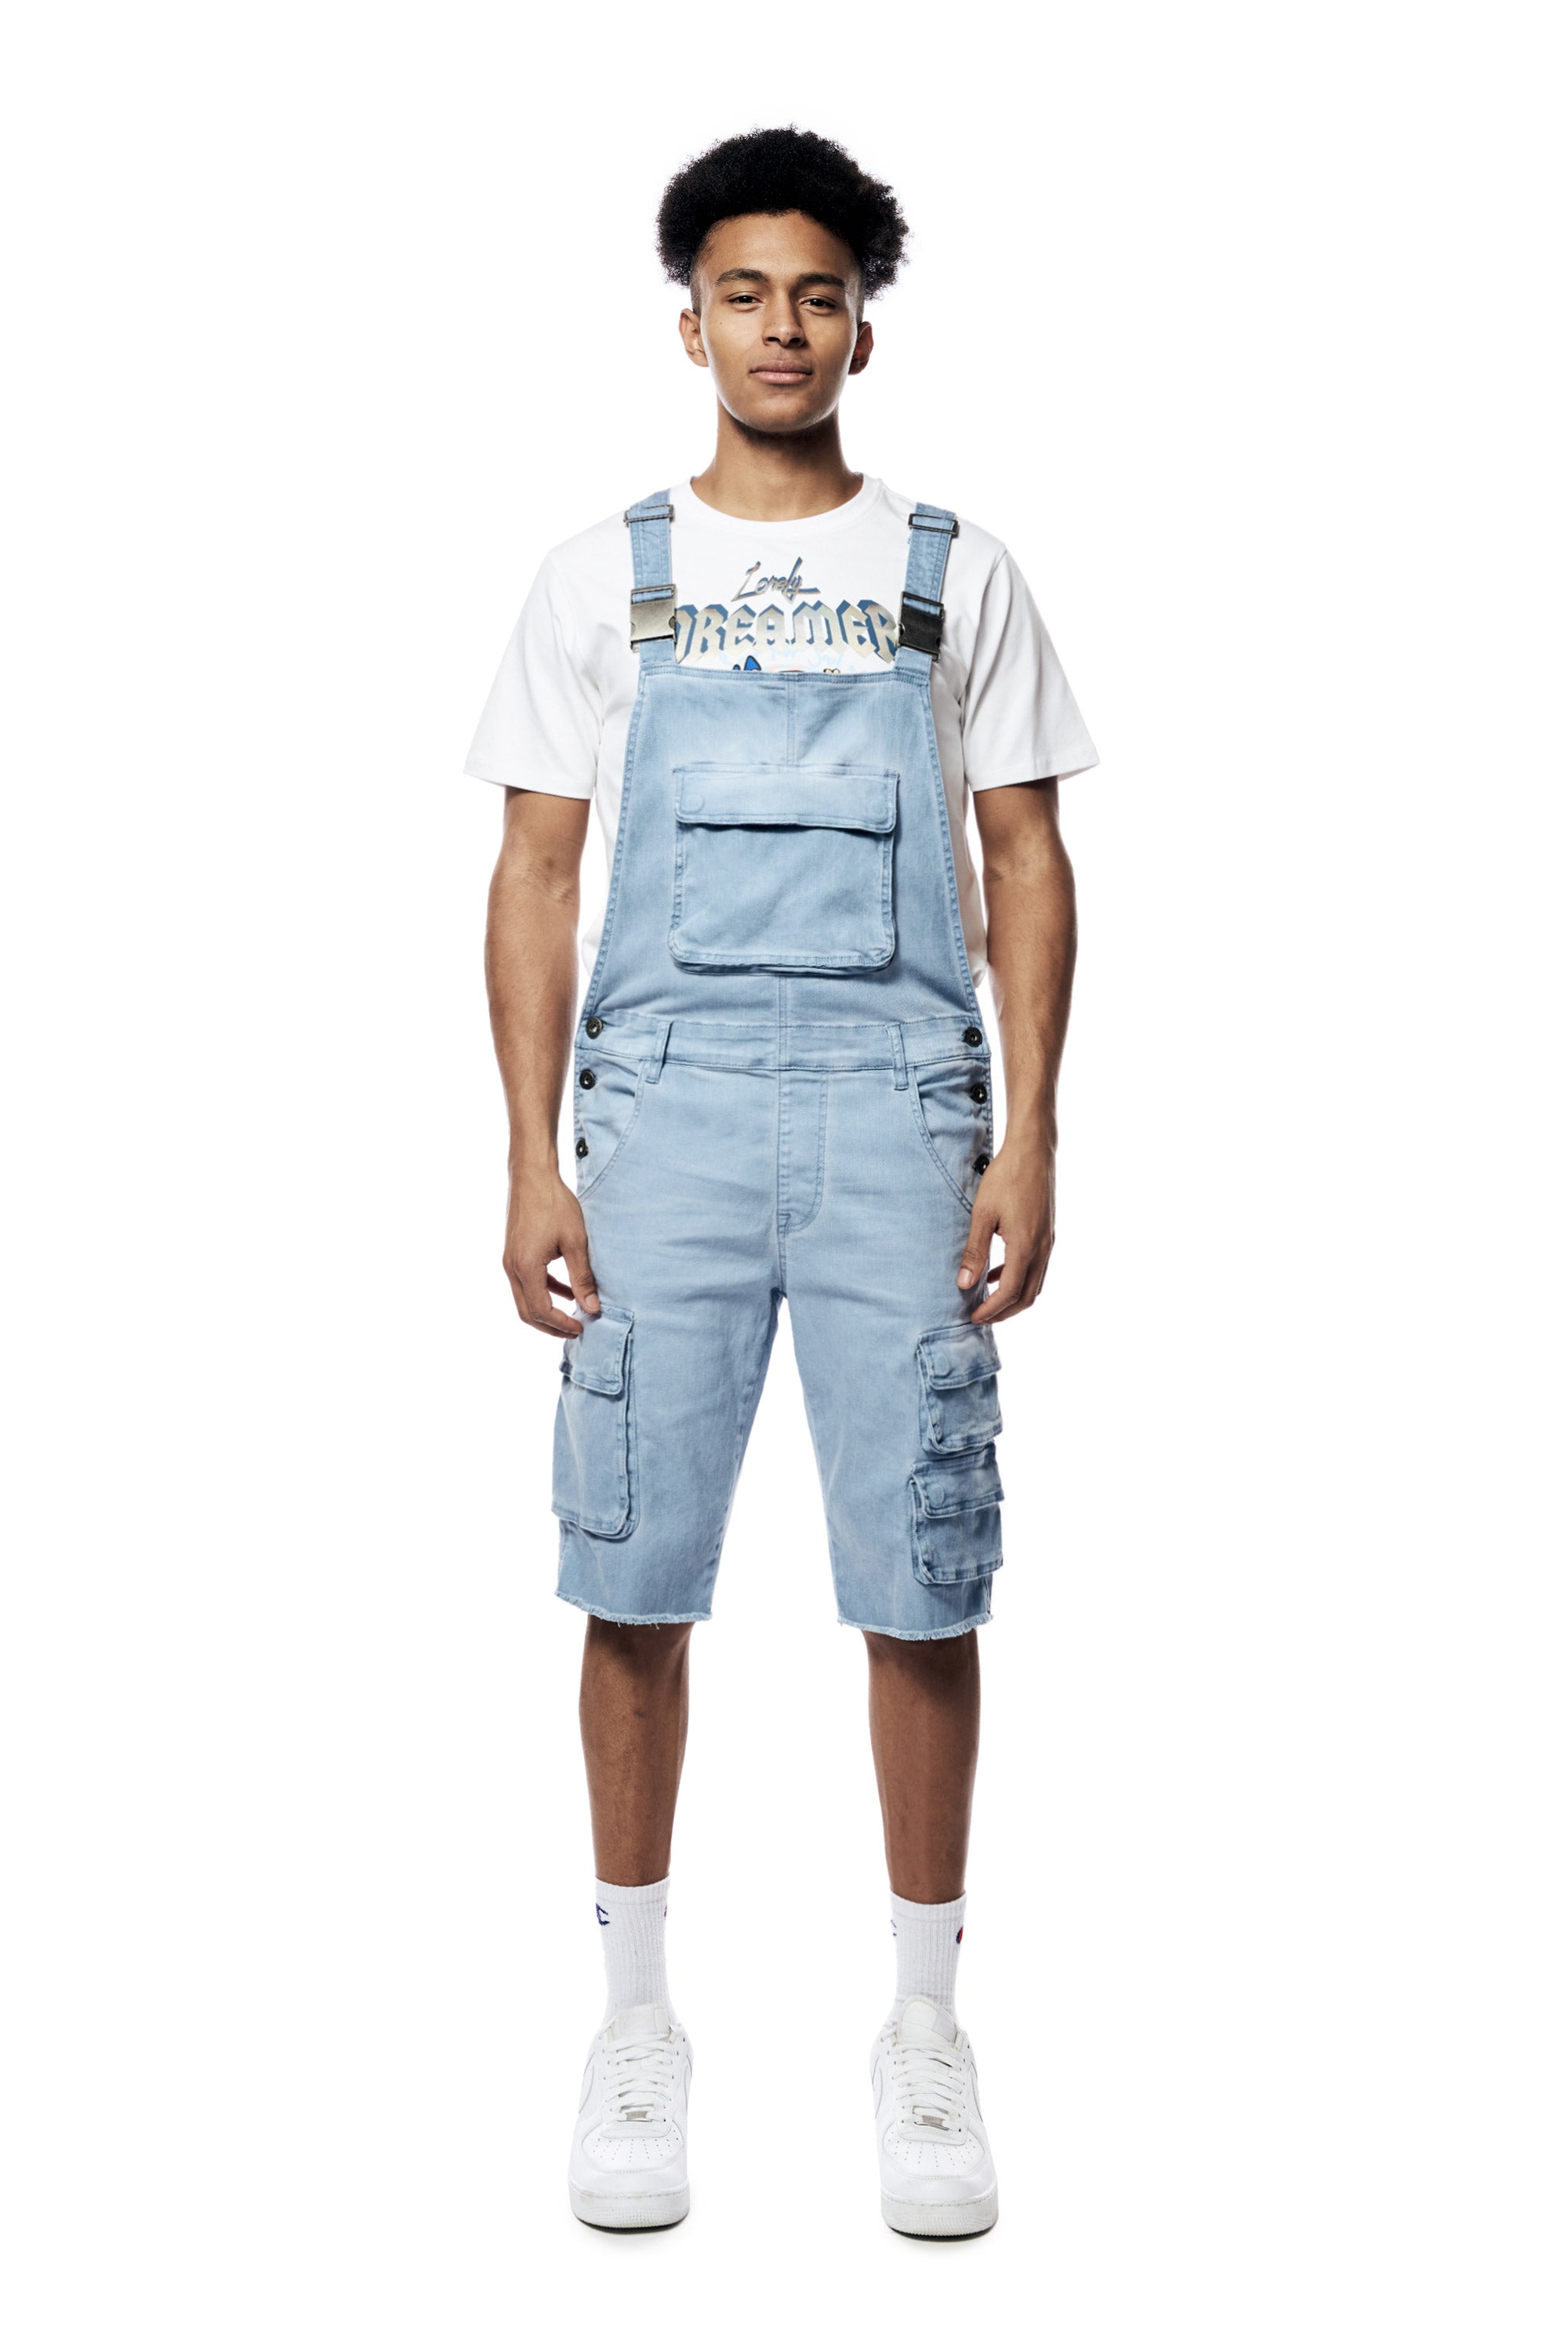 Pigment Dyed Utility Twill Overall Shorts - Dusty Seabreeze